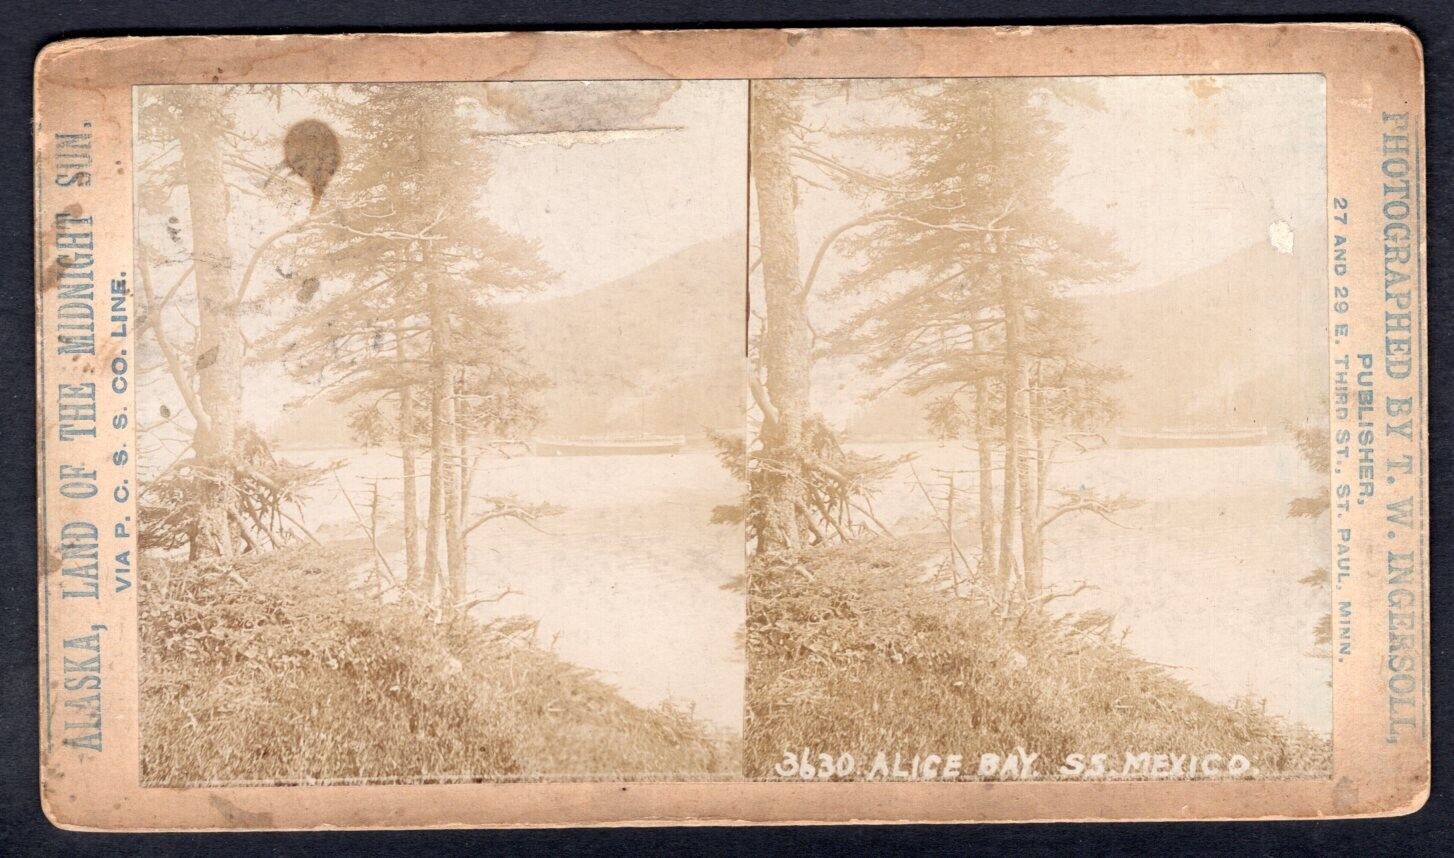 USA Alaska 1880s Steamer SS Mexico in Alice Bay Stereoview Photo by Ingersoll